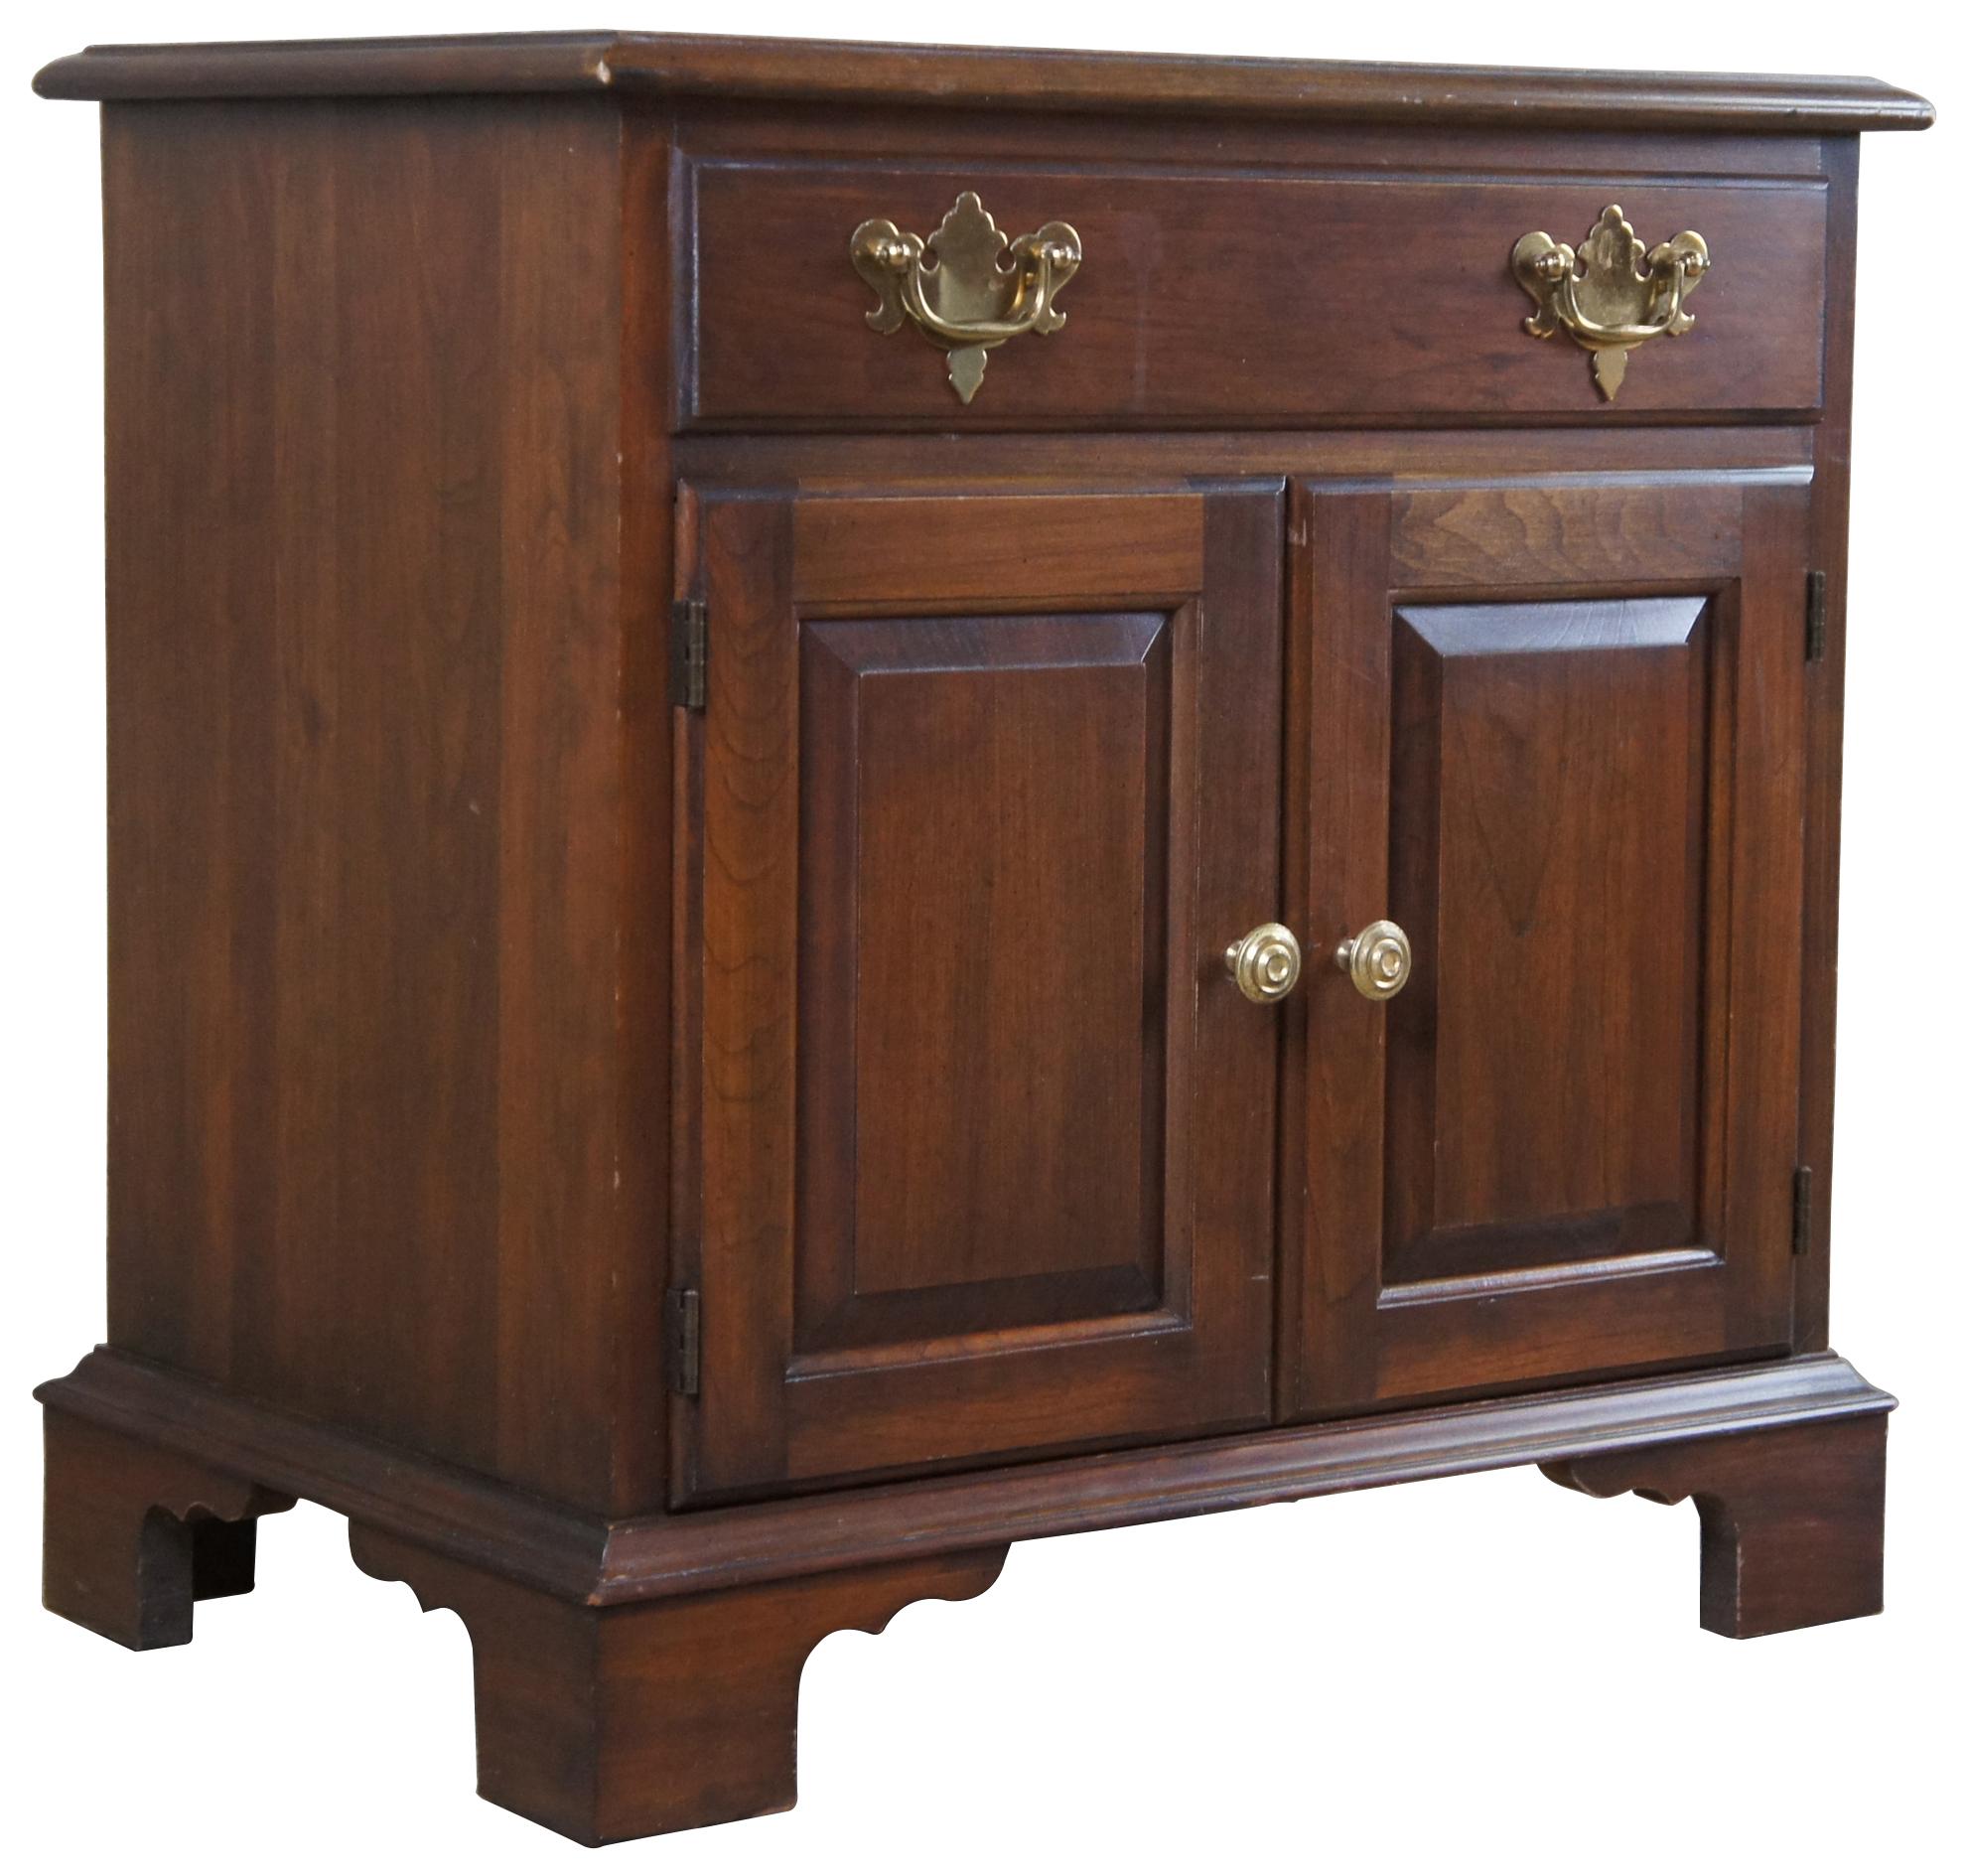 Federal Vintage Pennsylvania House Cherry Nightstand Dresser Cabinet Chest of Drawers